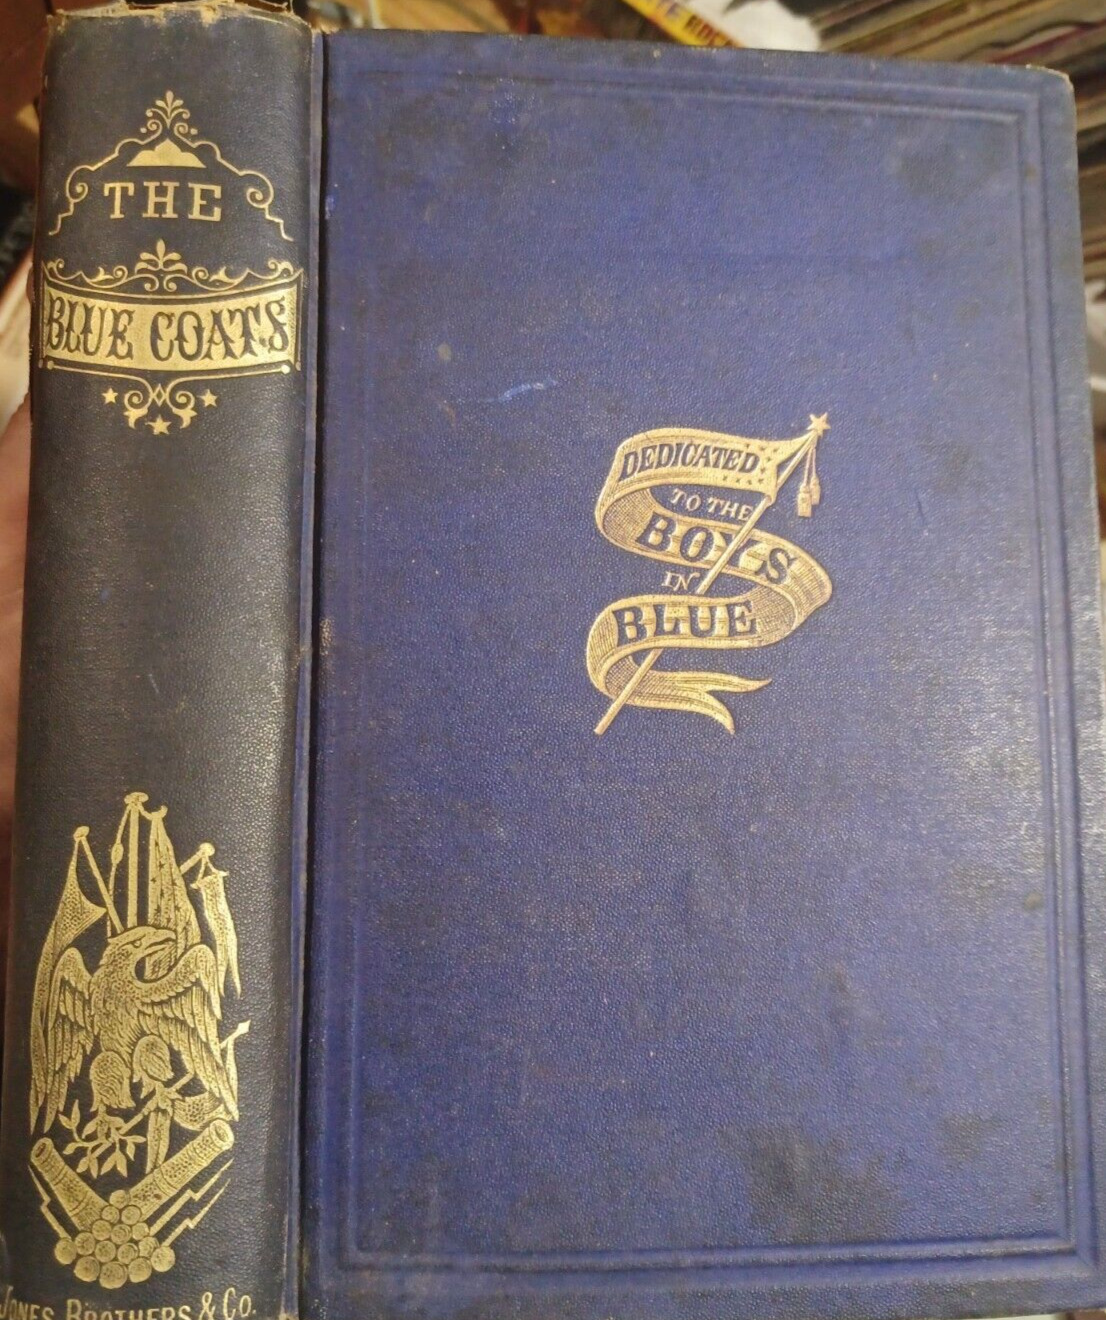 1867 The Blue Coats by Truesdale, Civil War history book, Union